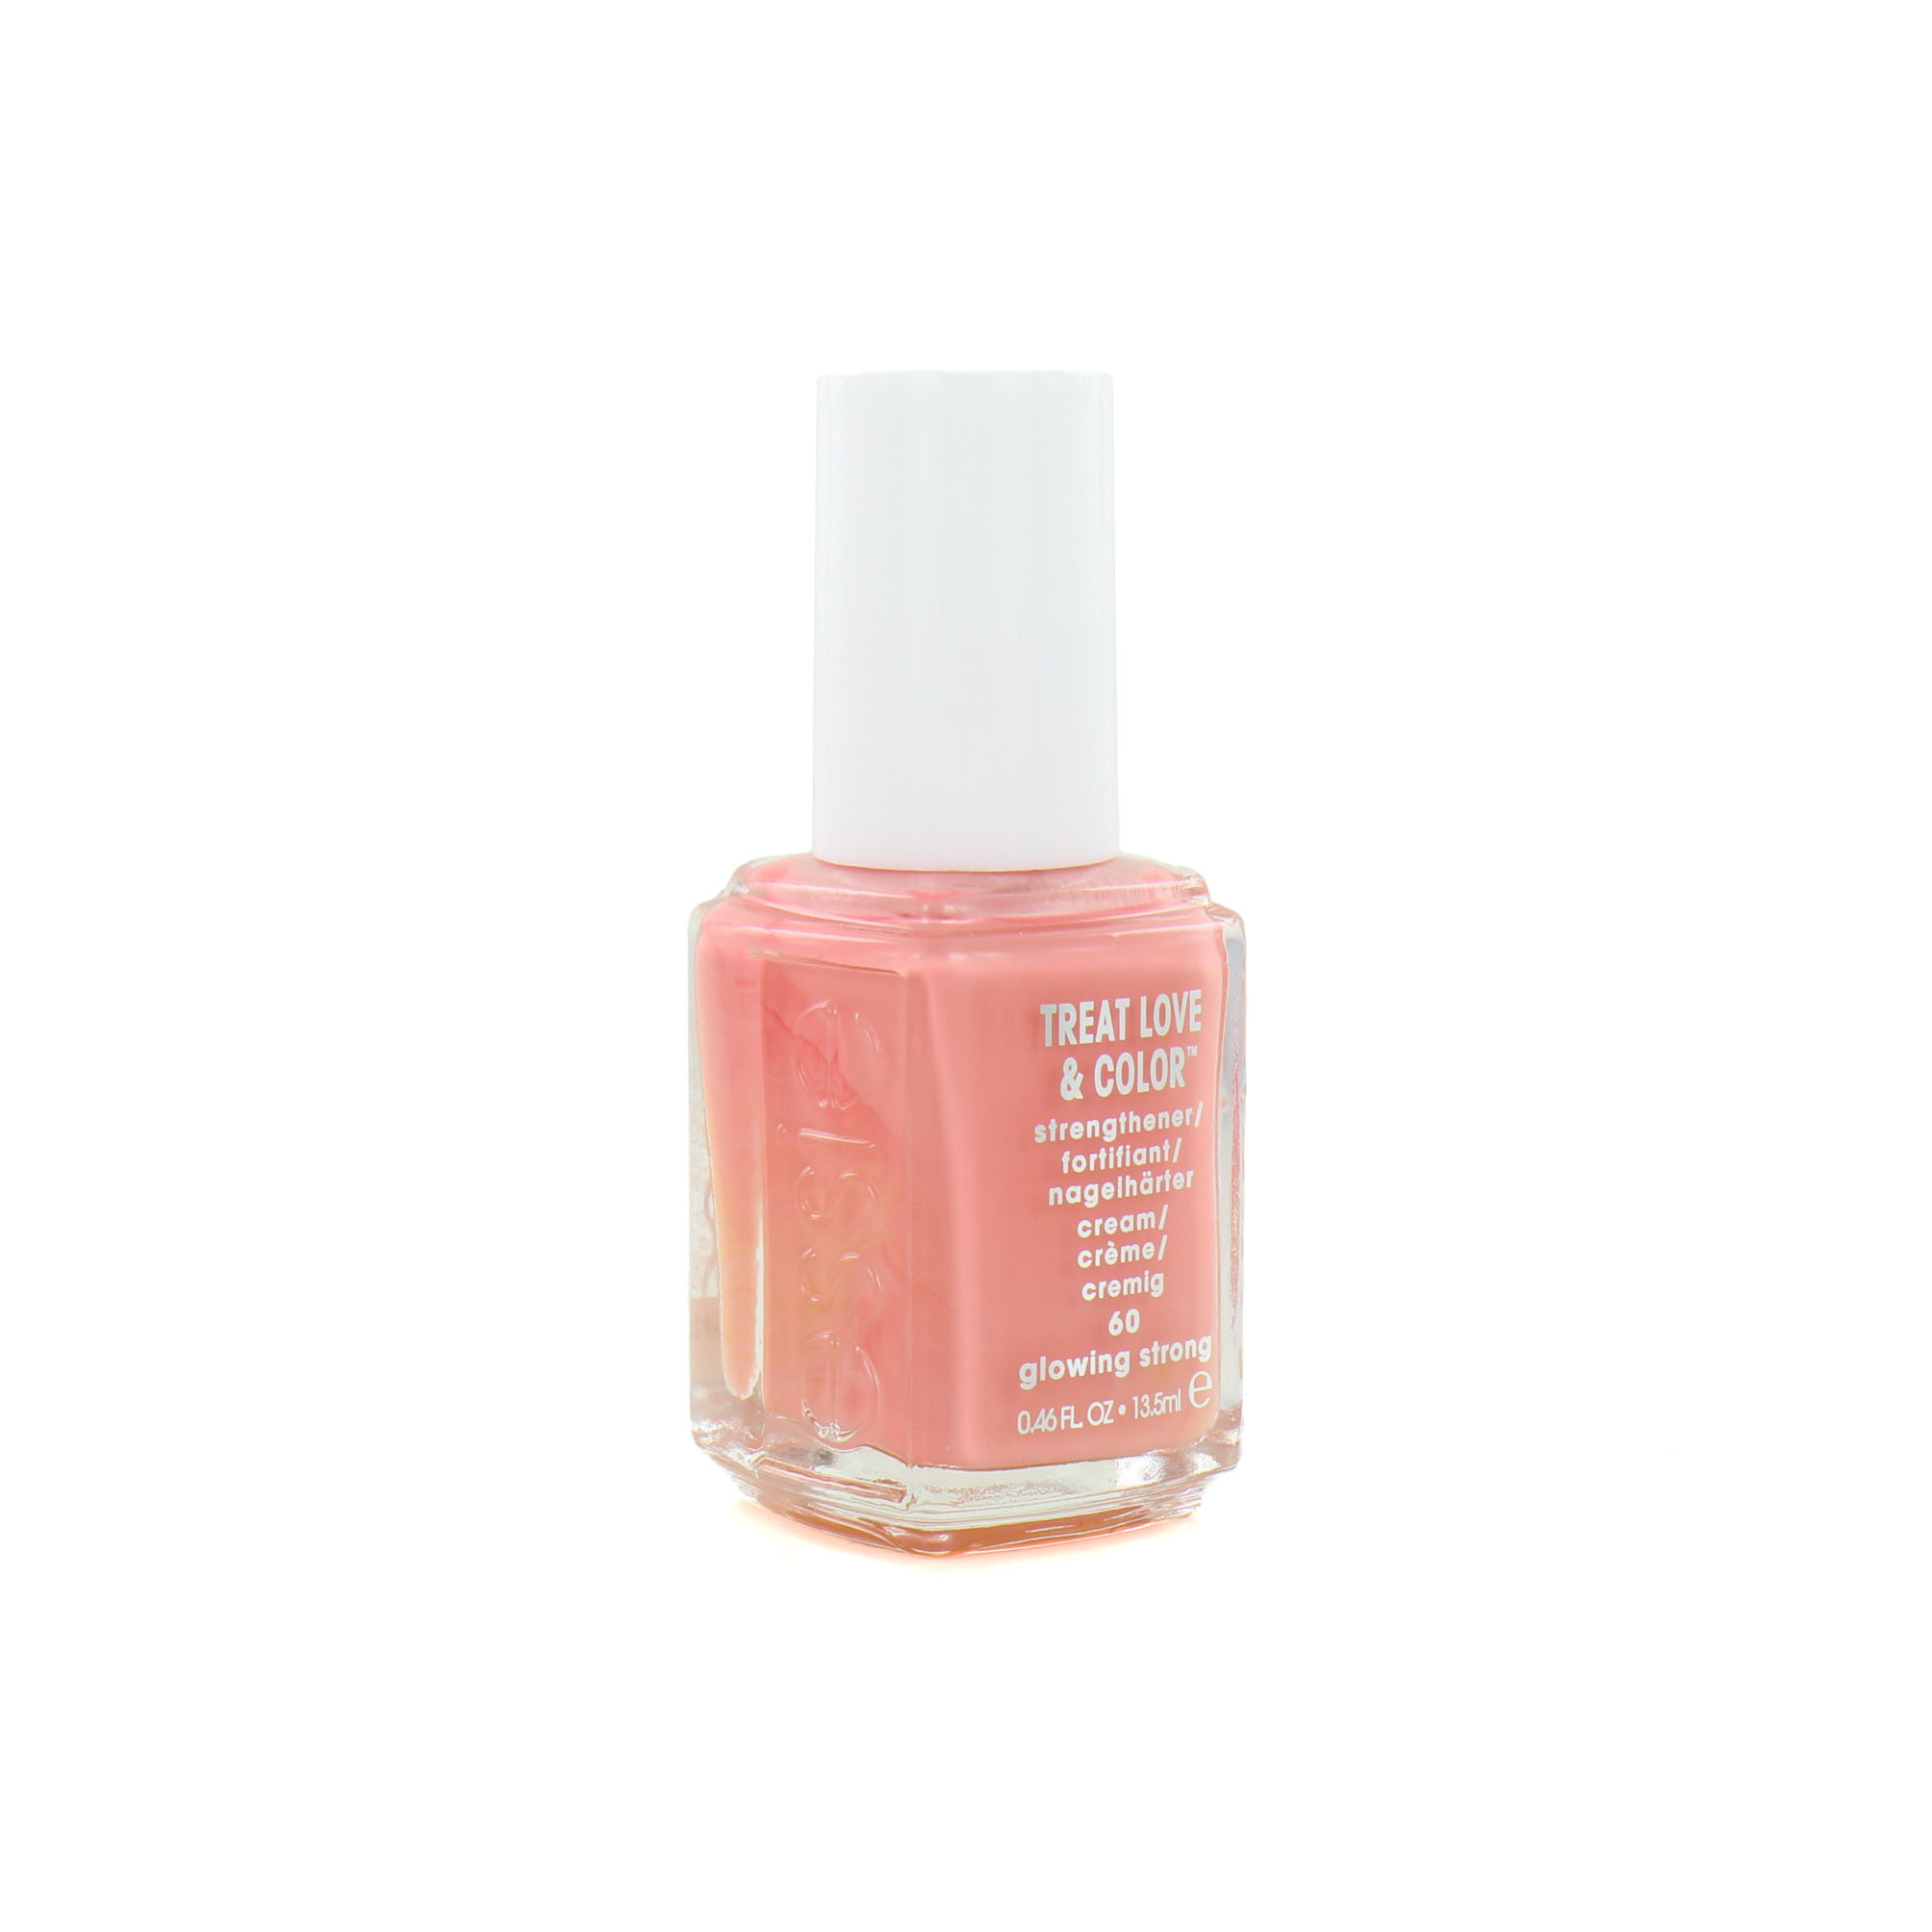 Essie Treat Love & Color 60 Strengthener Kaufen - Blisso - Strong Glowing